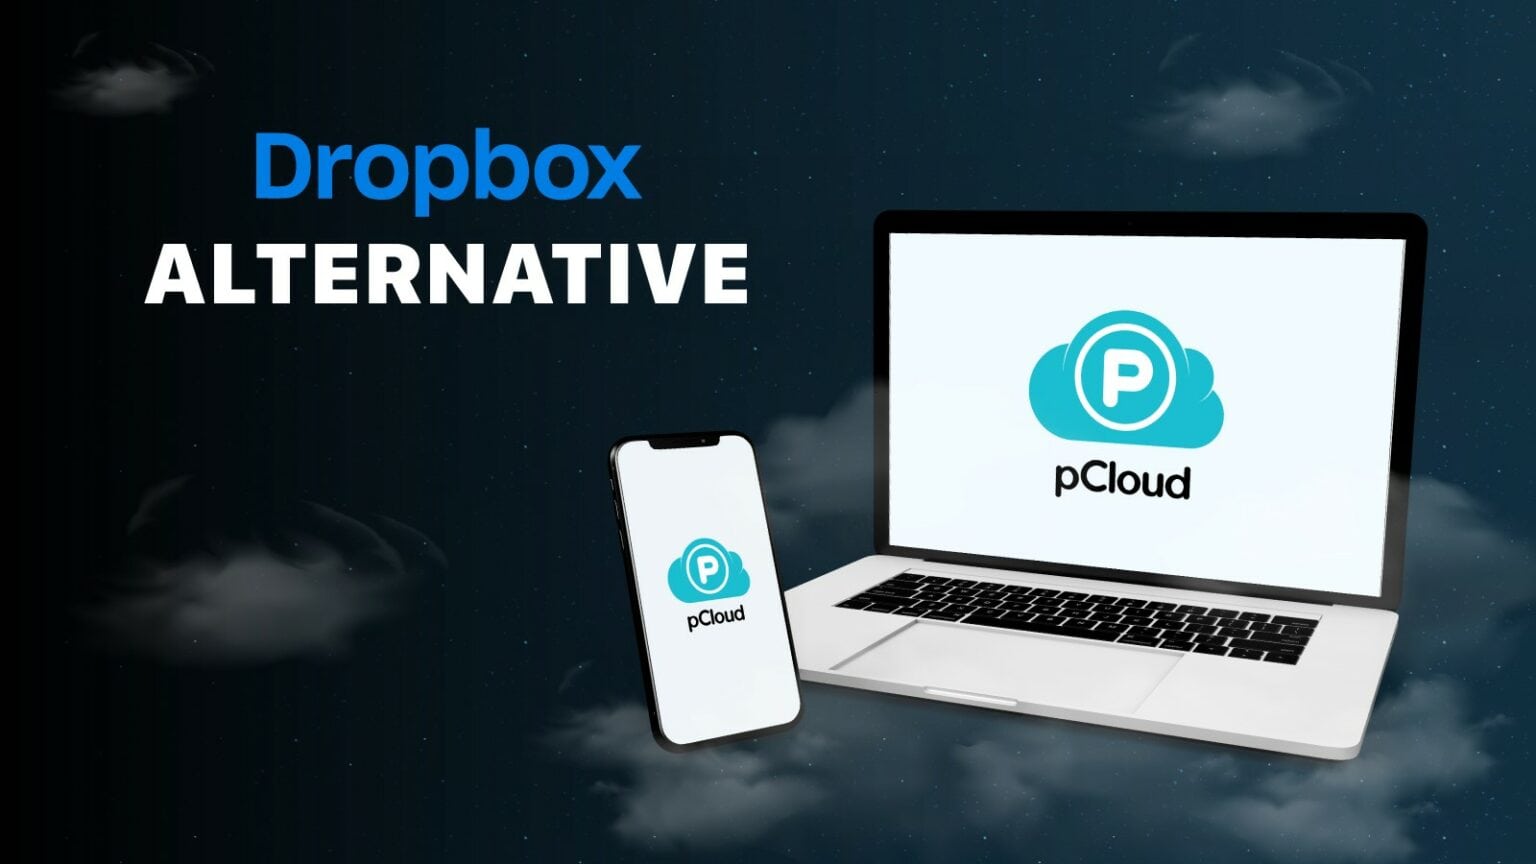 If you're looking for cloud storage, consider pCloud as an alternative to Dropbox and other services.